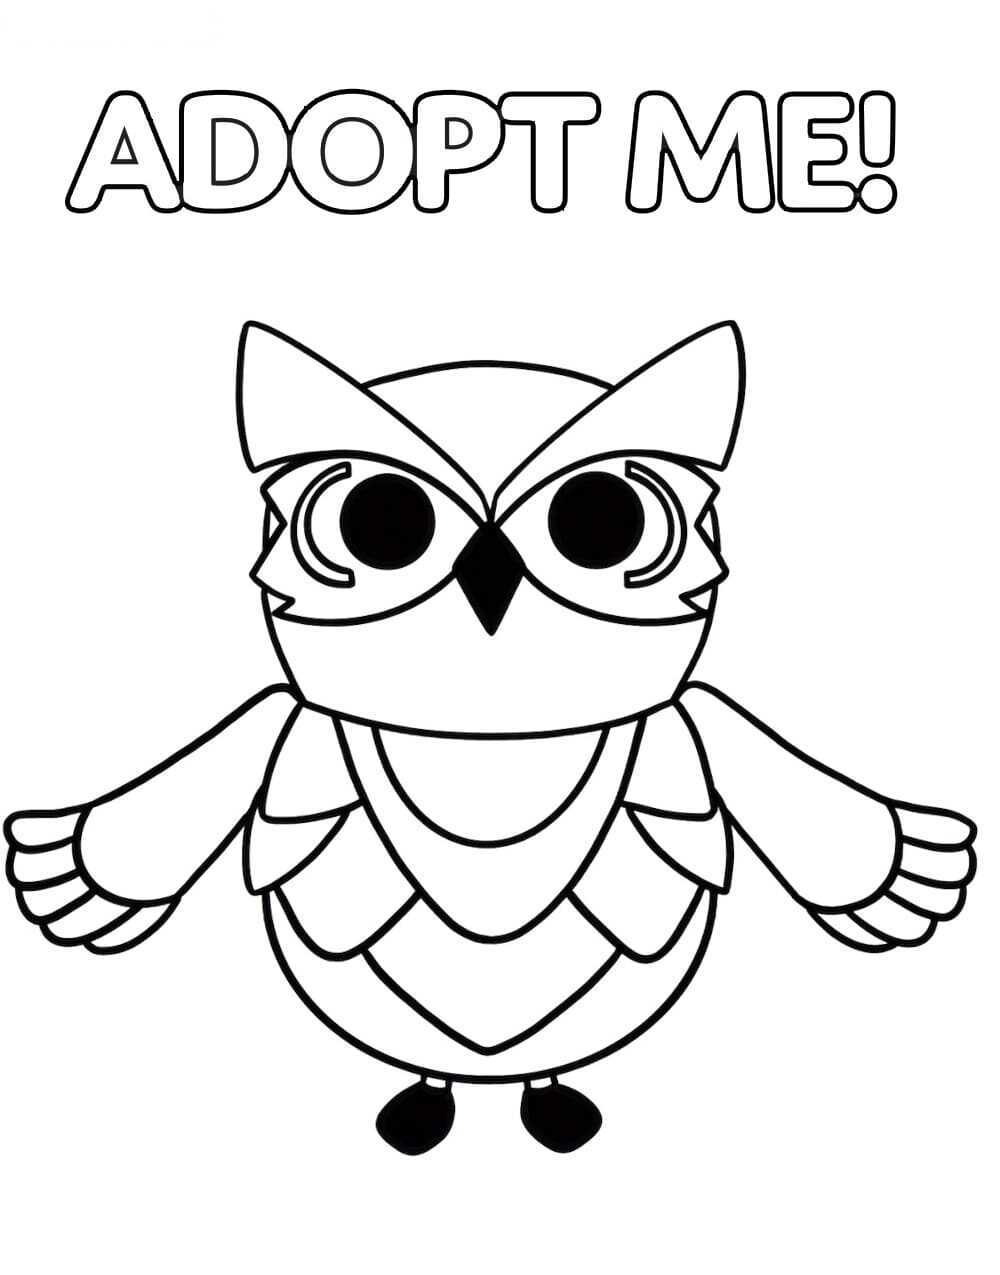 Adopt me Snow Owl has big, round and black eyes Coloring Pages